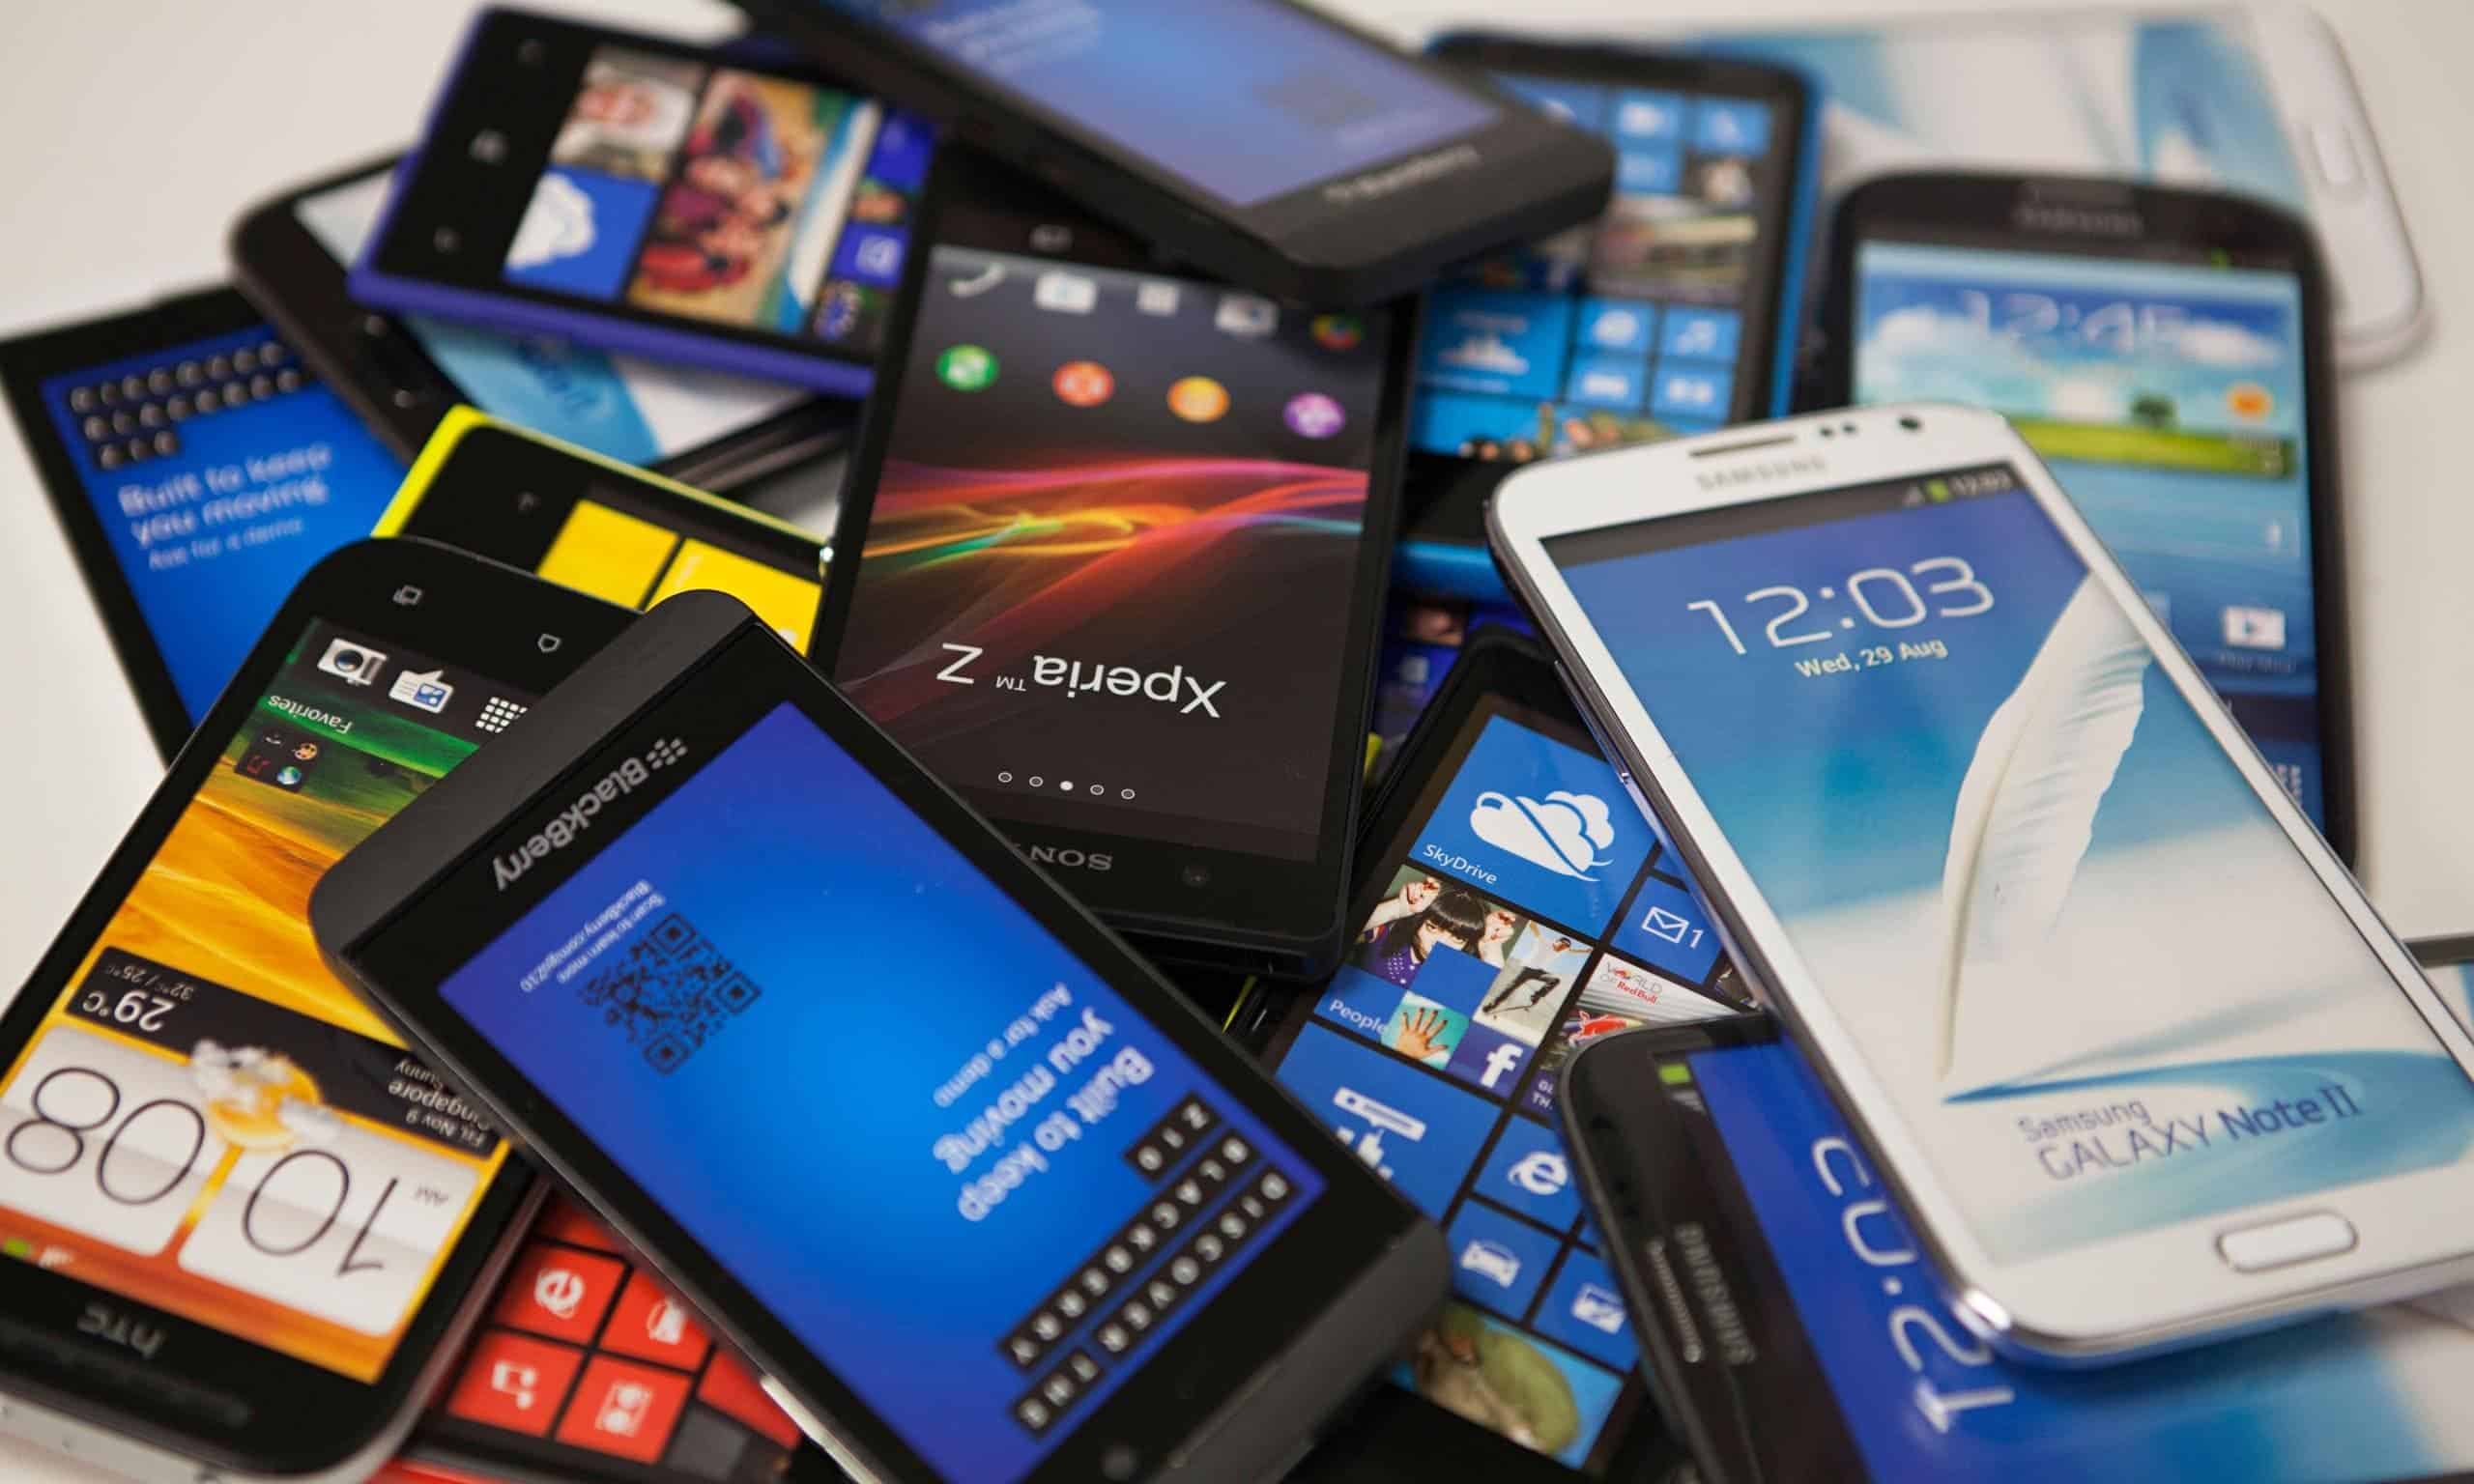 samsung-and-t-mobile-to-offset-new-phones-by-recycling-old-phones